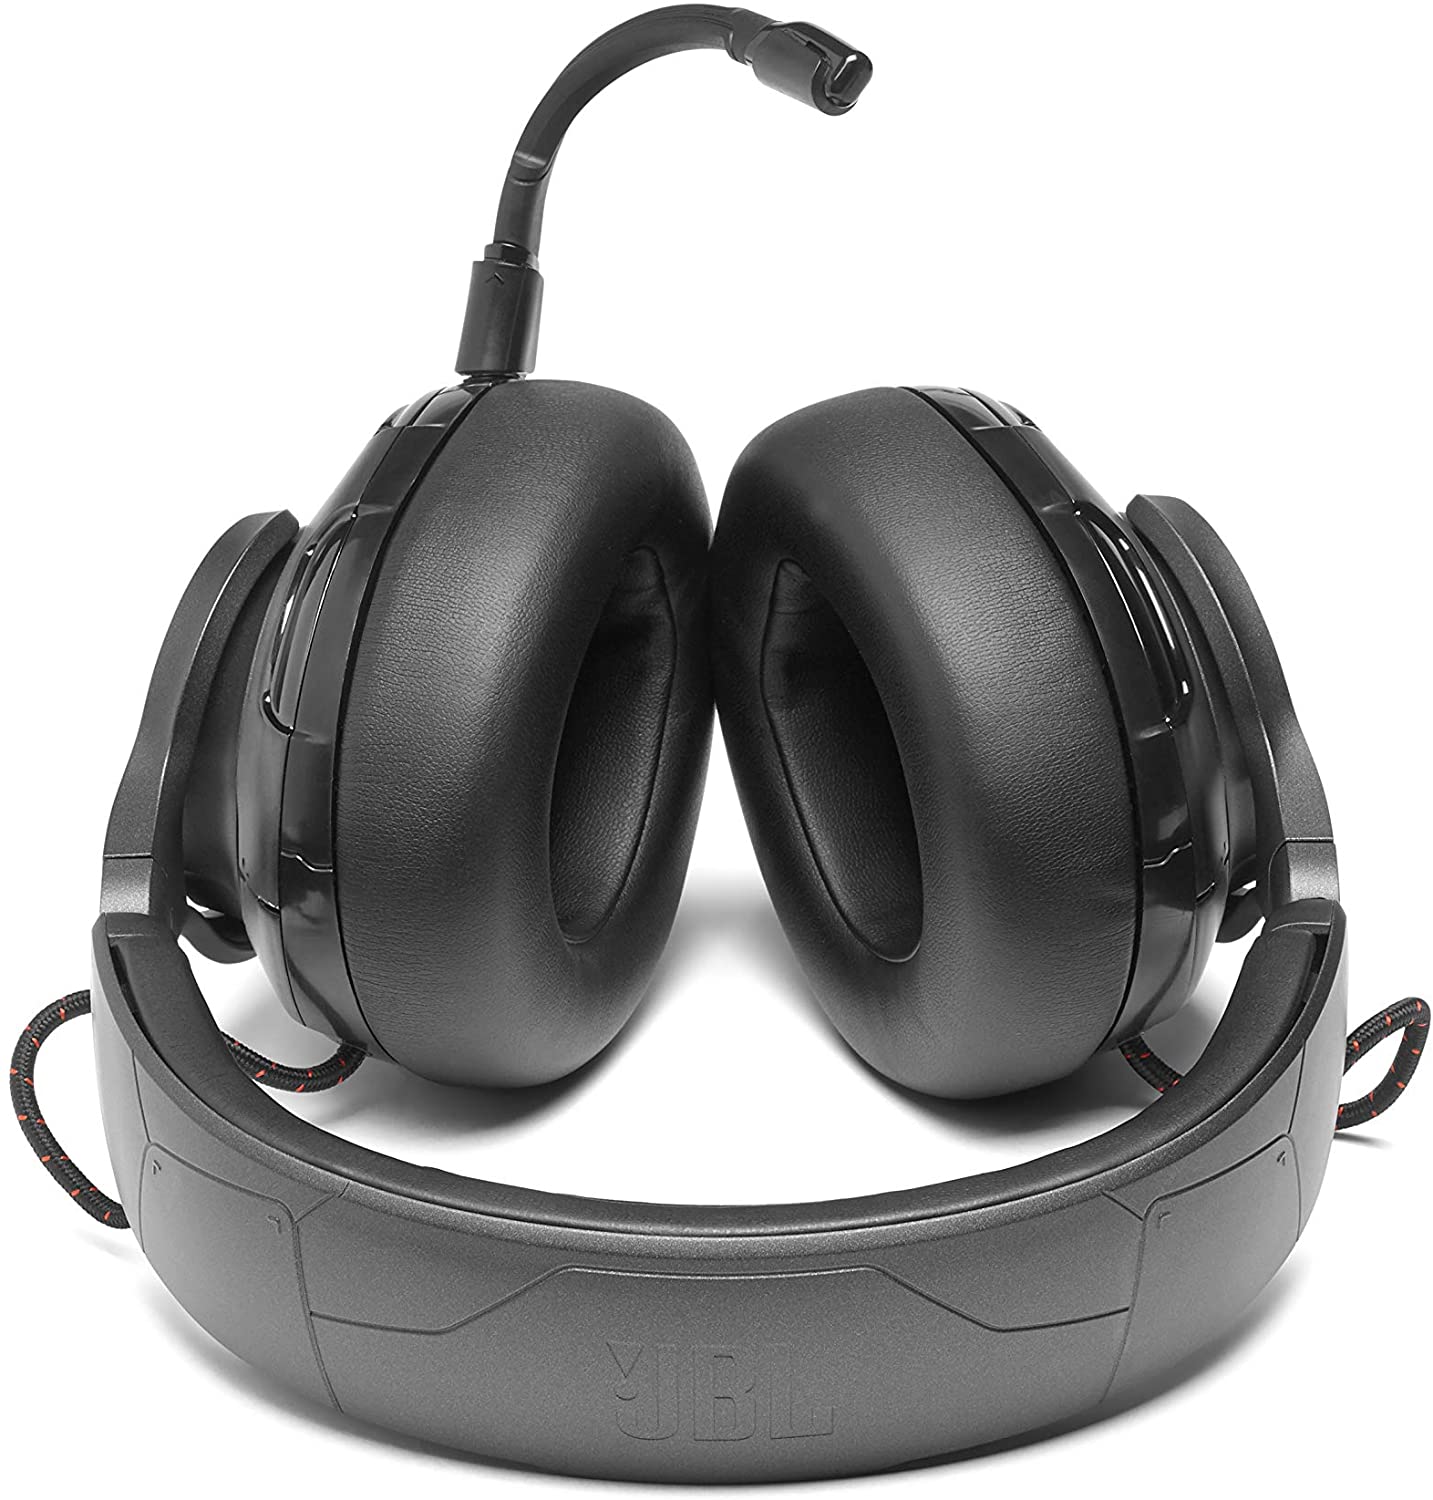 JBL Quantum ONE Wired Over-Ear Gaming Headset, Black